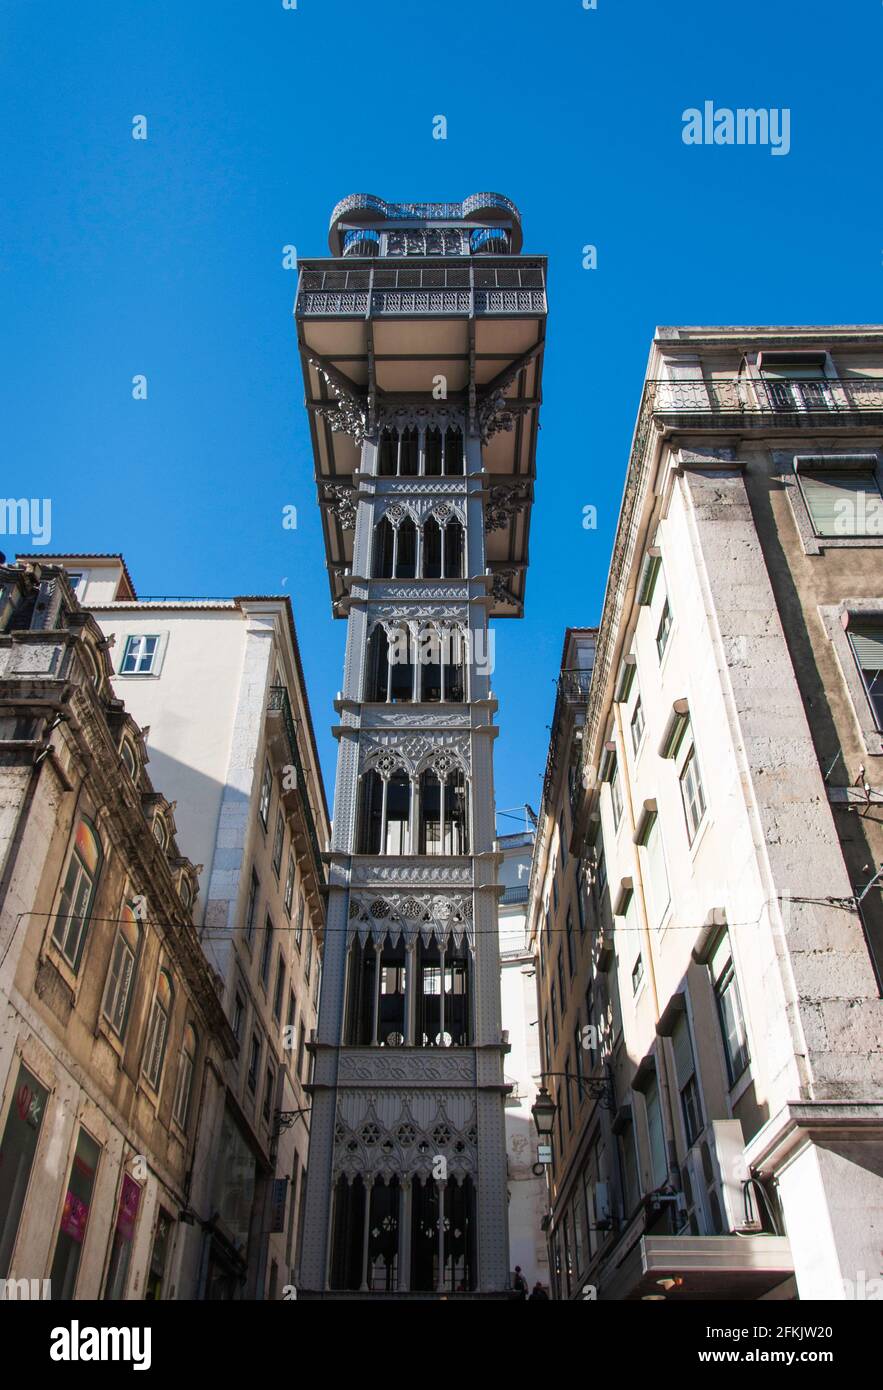 Elevador de Santa Justa: Elevator in Lisbon. It is a beautiful summer day with a clear blue sky Stock Photo